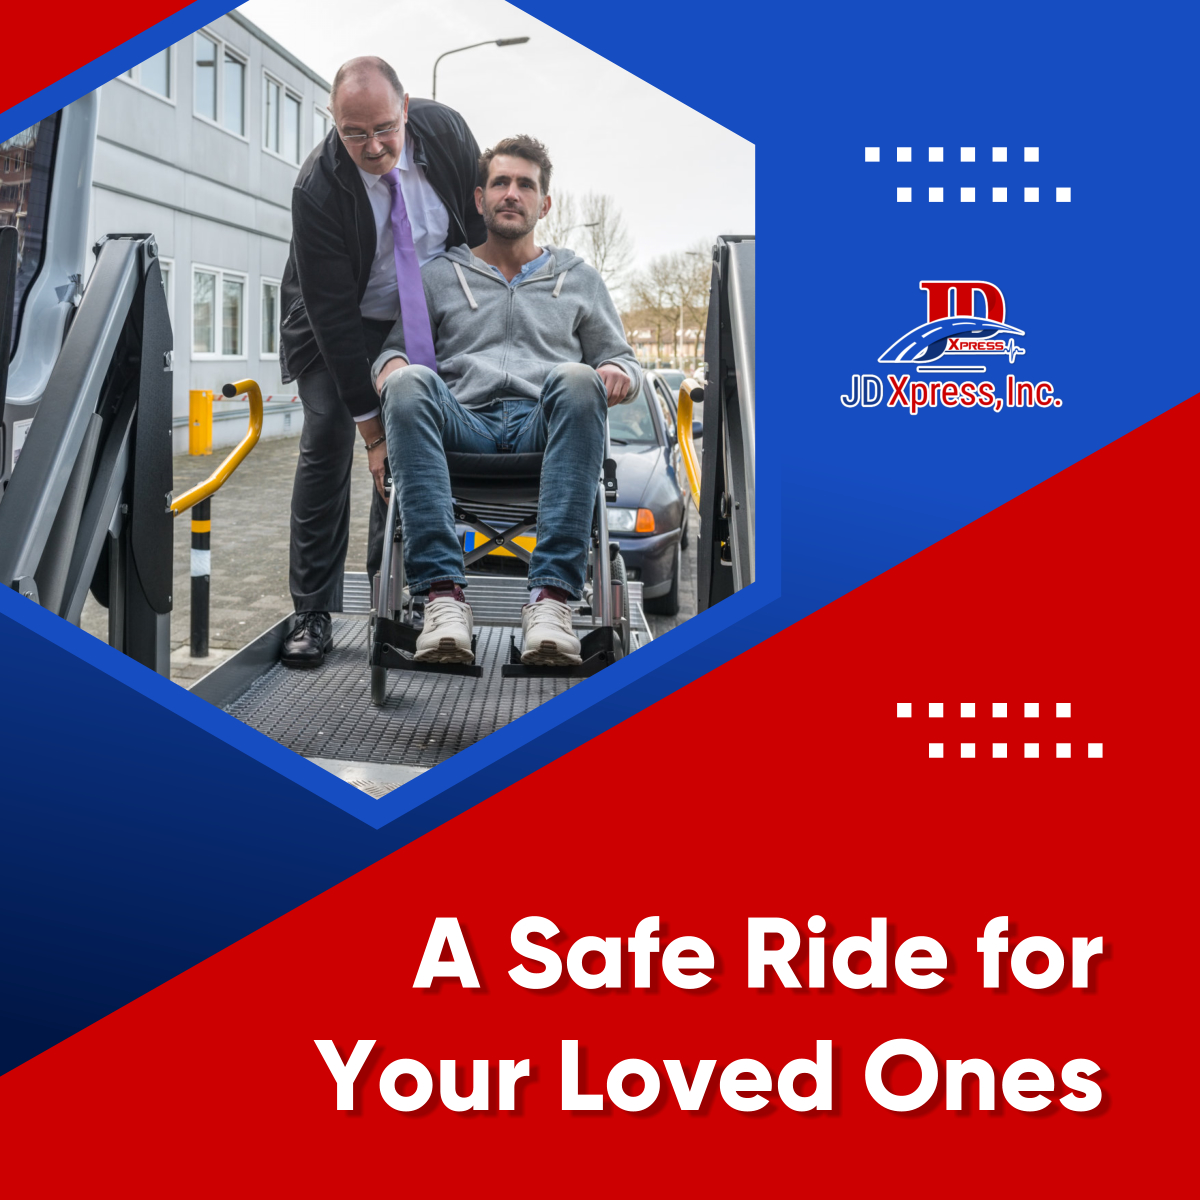 Every trip needs to be a safe one. To ensure you get to your destinations safely, we offer a range of non-emergency medication transportation services for your every need.
 
#TheBronxNY #SafeRide #NEMTServices #TransportationServices